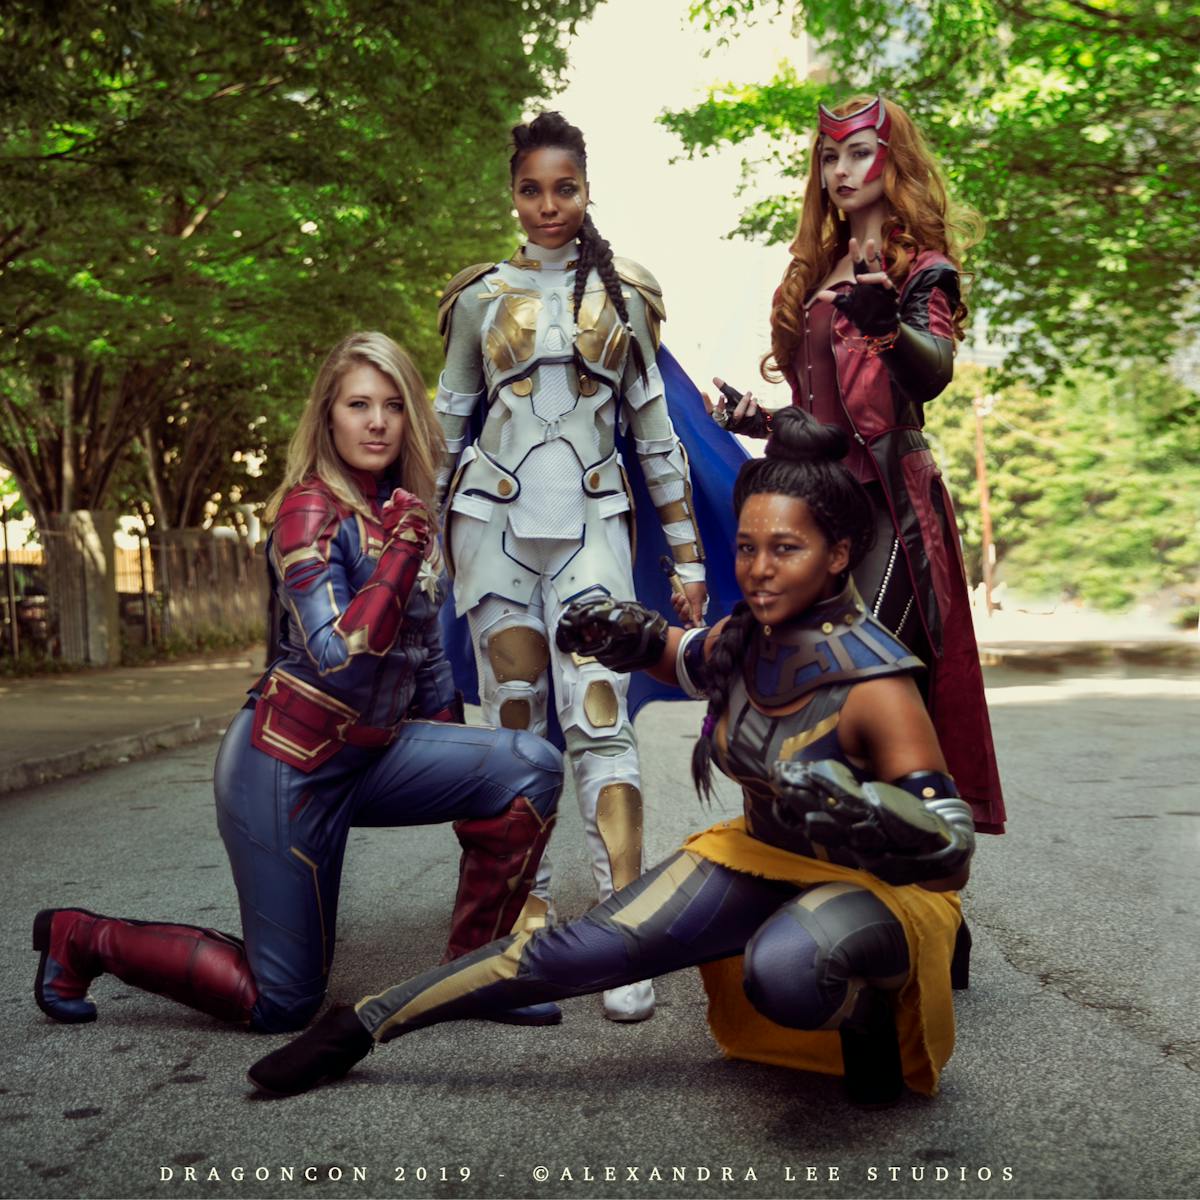 Cosplayers portraying Captain Marvel, Valkyrie, Scarlet Witch, and Shuri from Marvel Cinematic Universe.